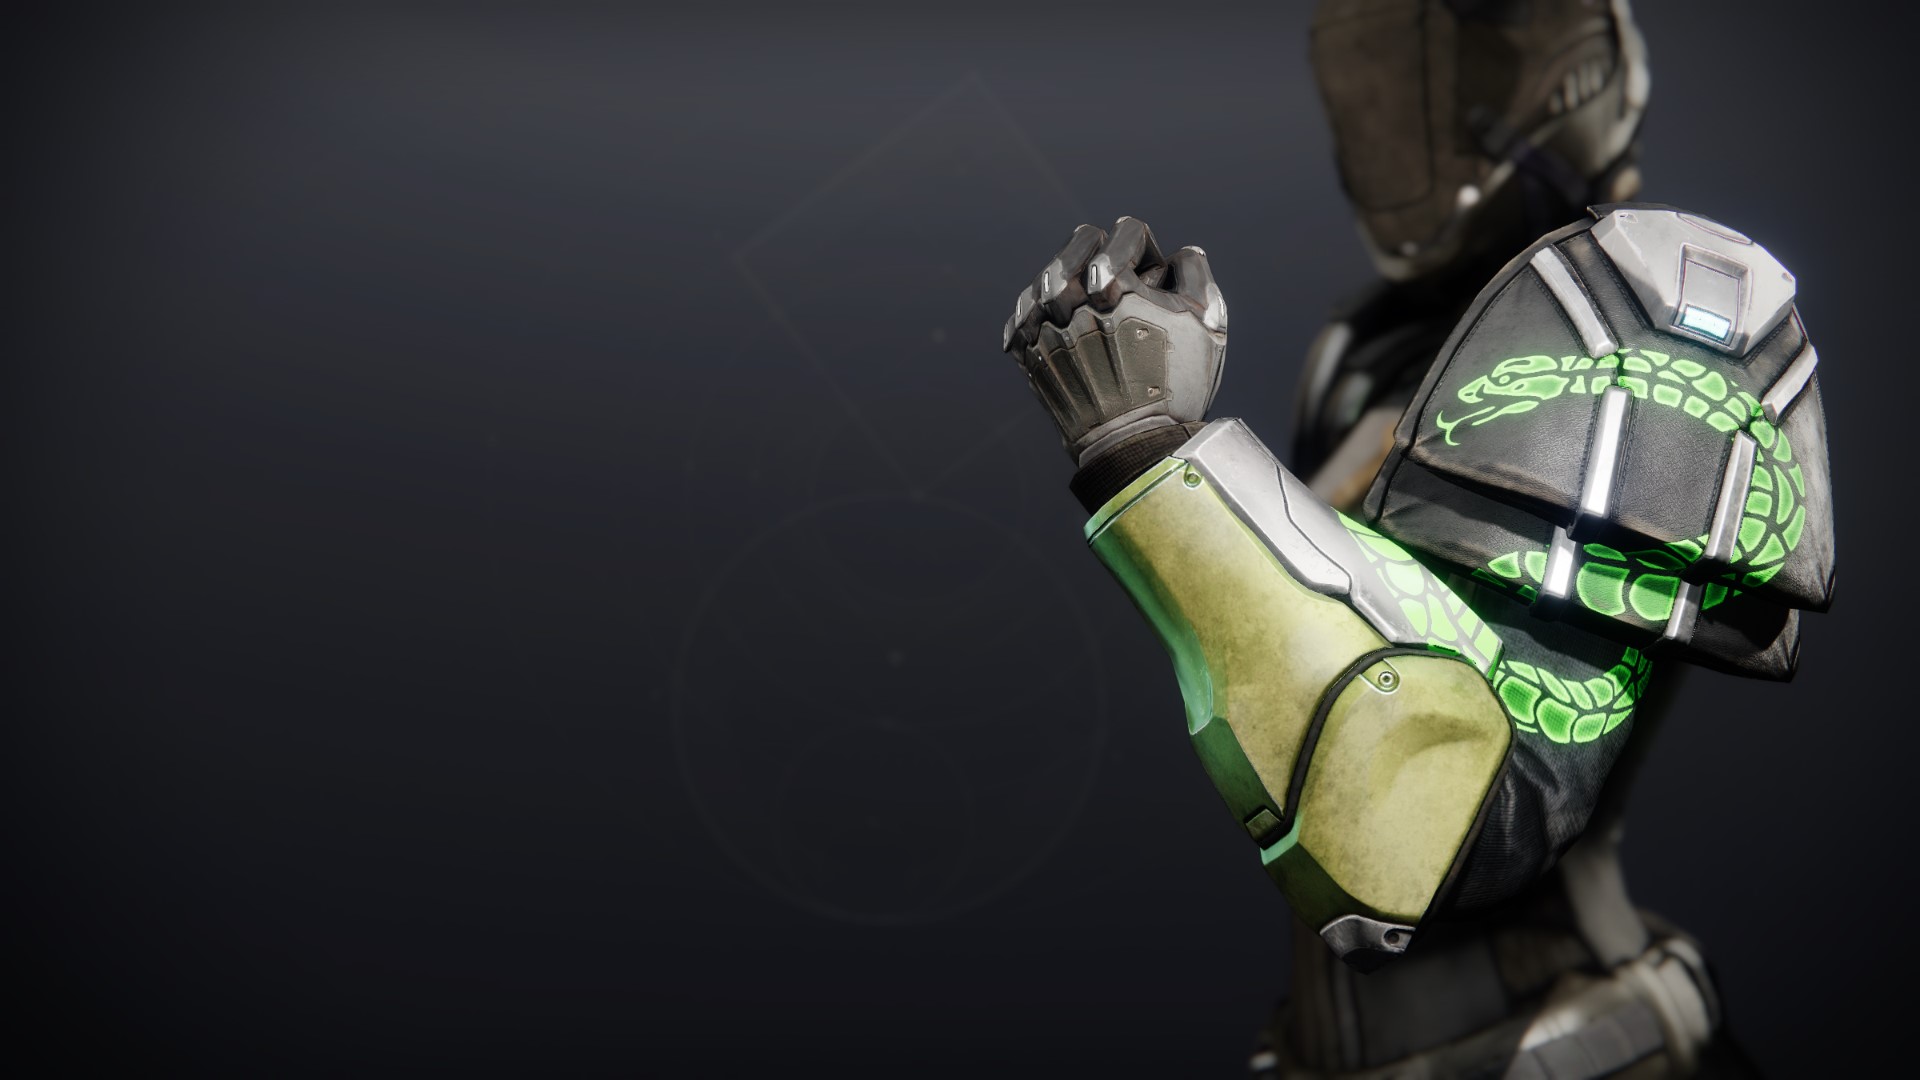 An in-game render of the Illicit Reaper Gauntlets.